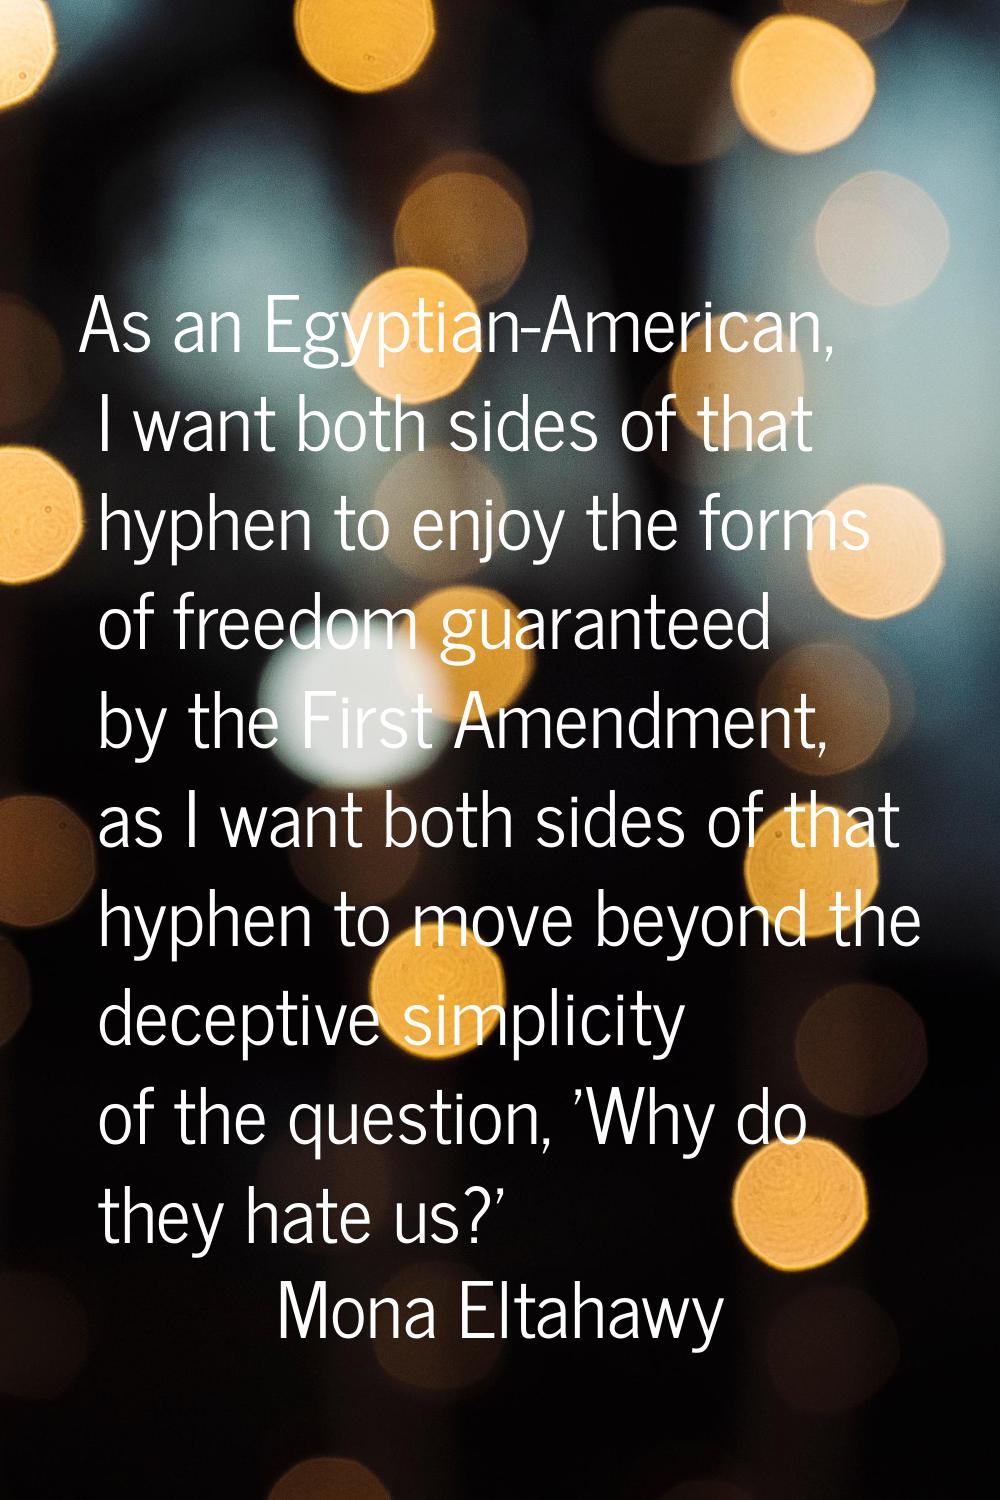 As an Egyptian-American, I want both sides of that hyphen to enjoy the forms of freedom guaranteed 